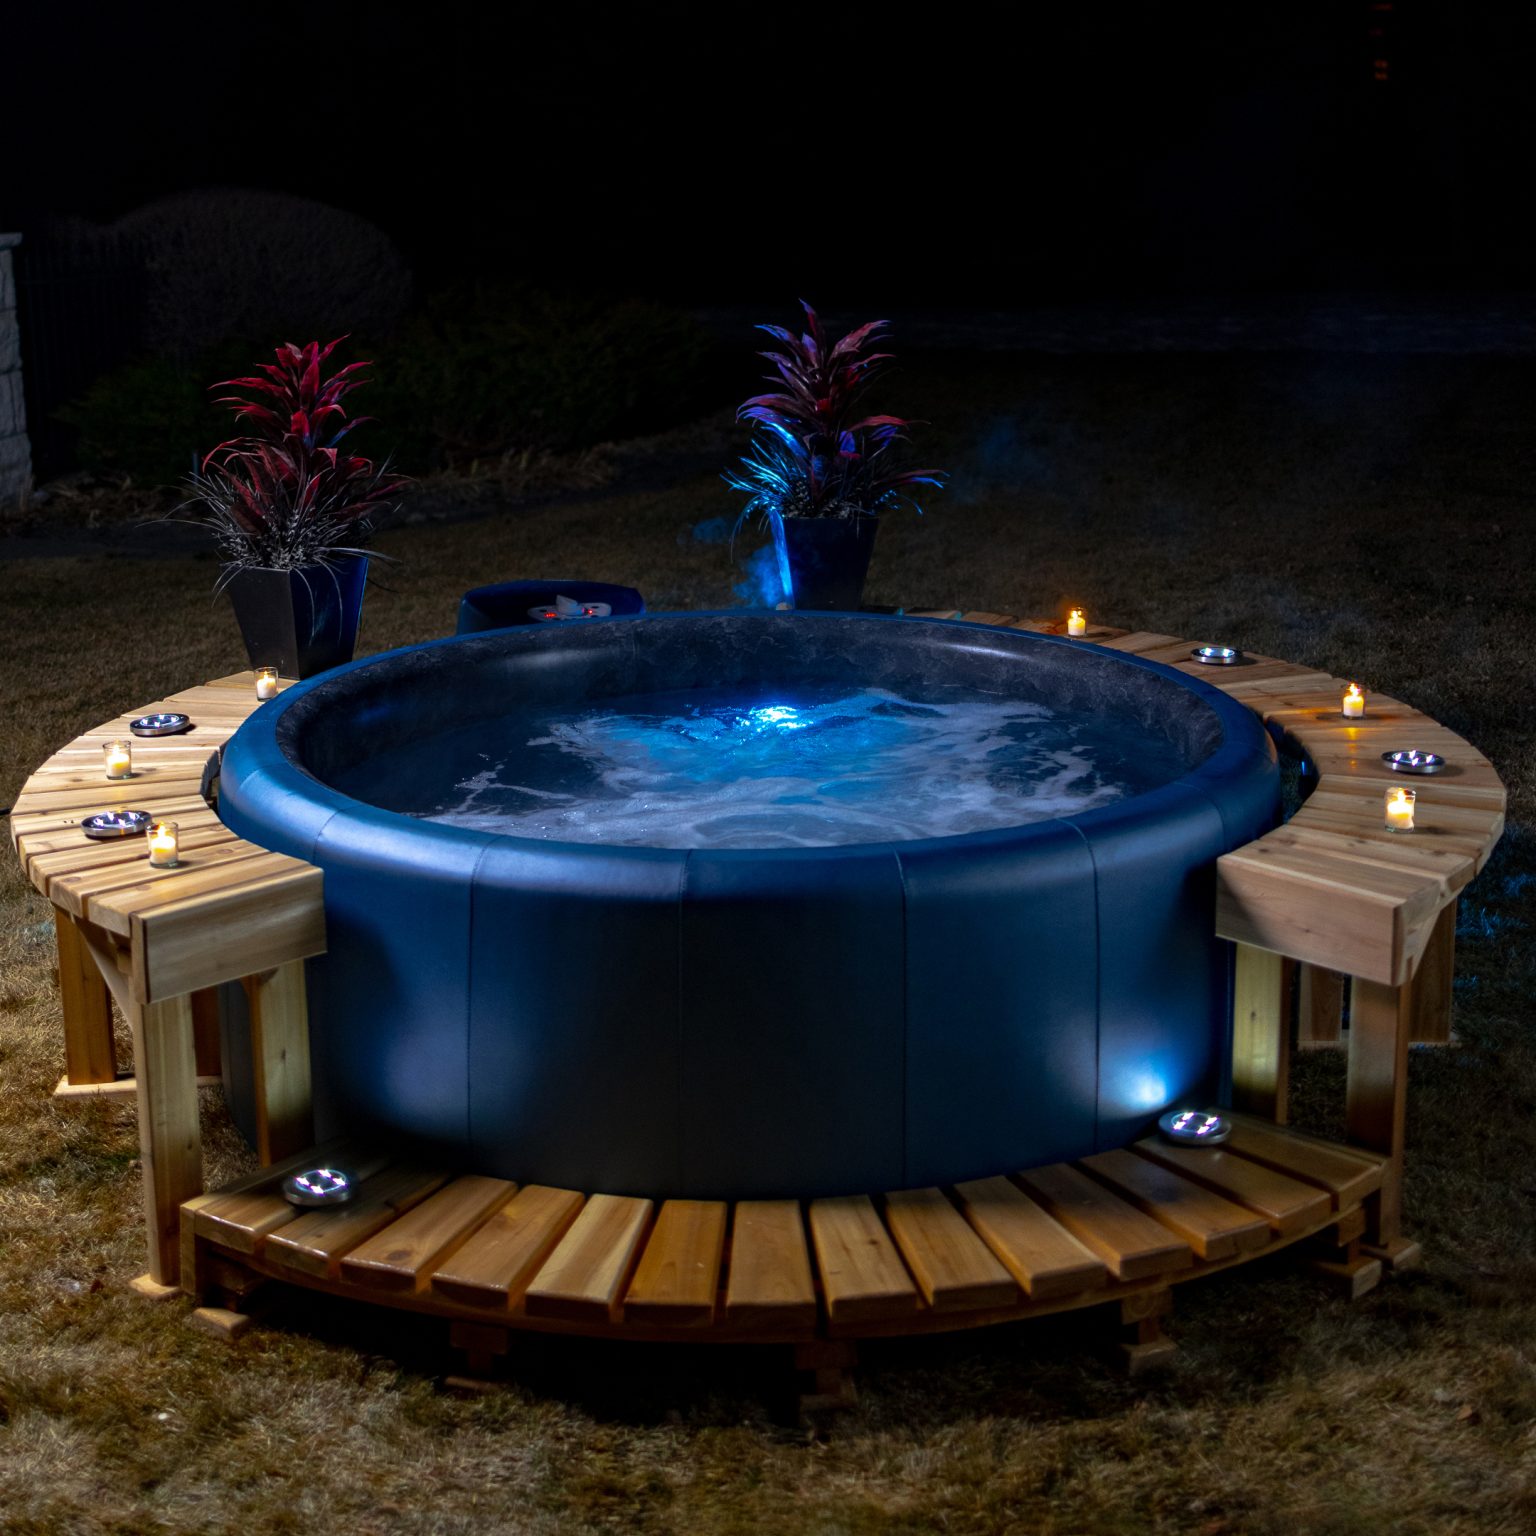 Softub, The Portable Hot Tub That Can Transition From Home To Cottage